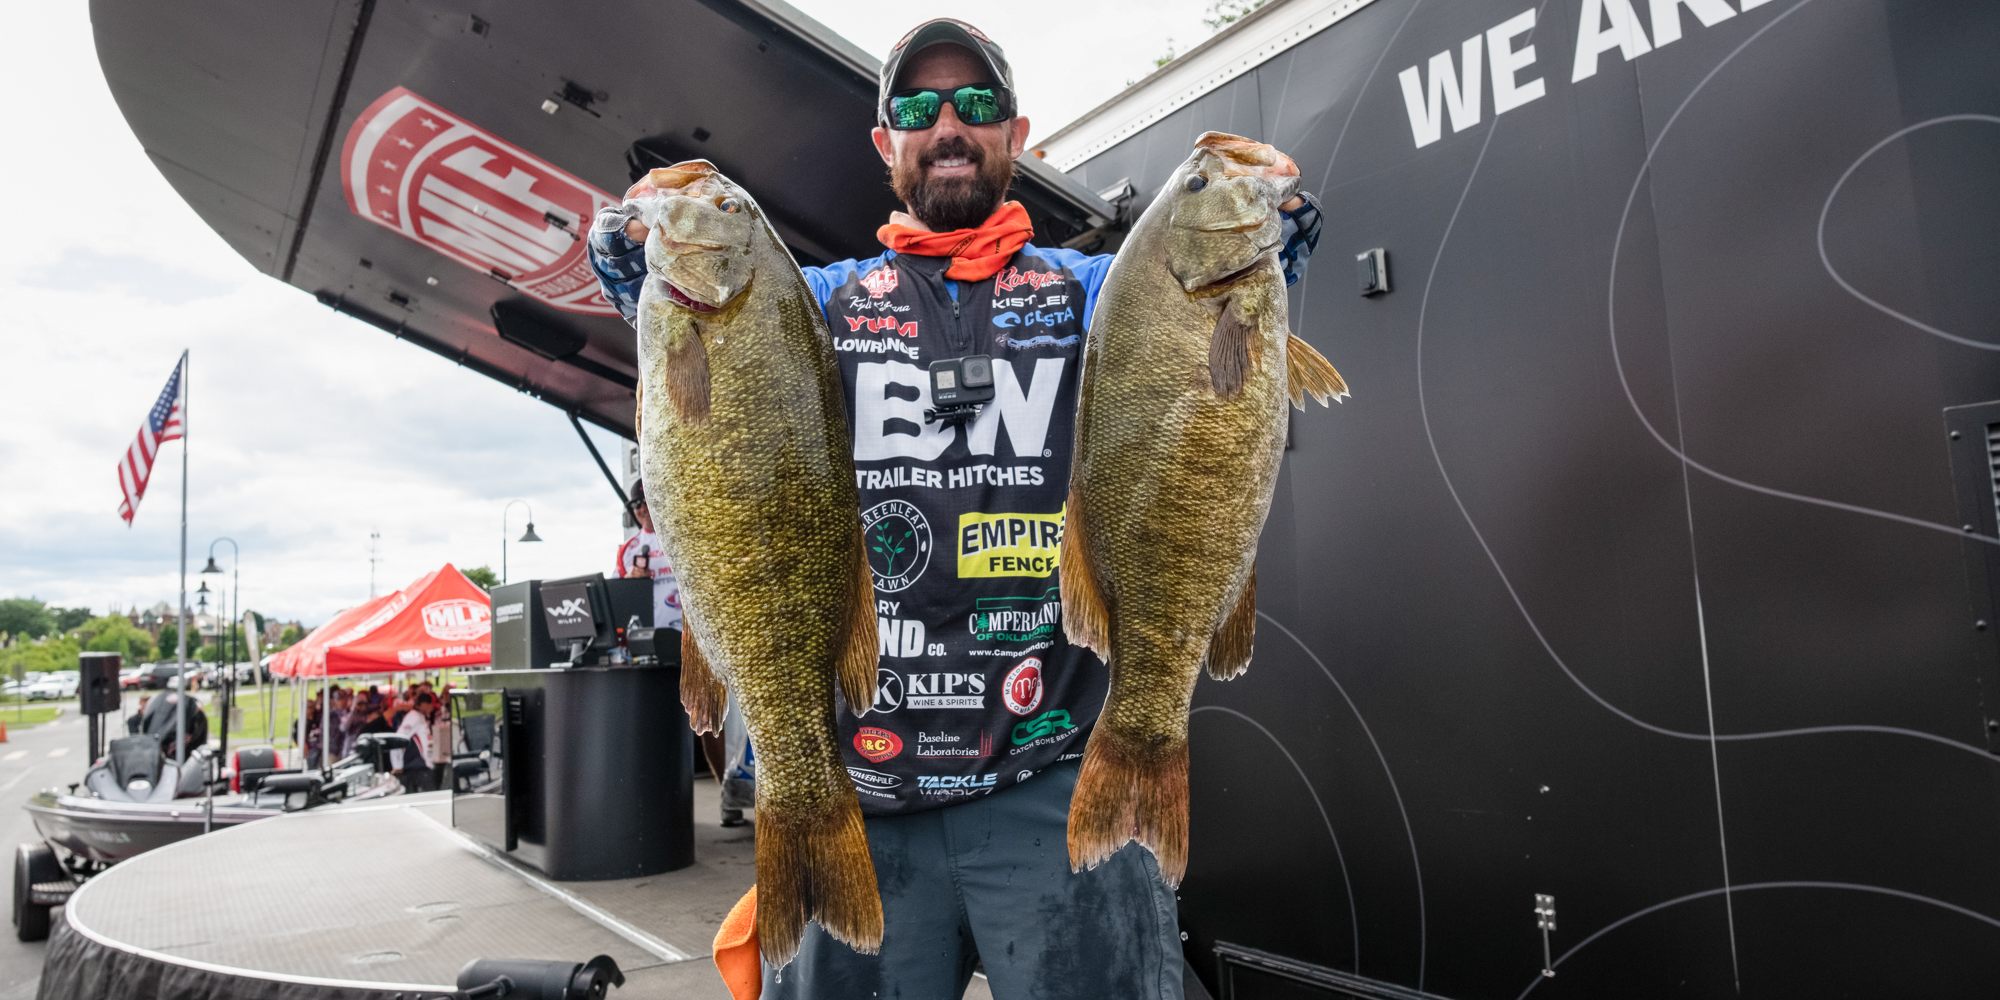 Oklahoma's Cortiana Overtakes Lead on Day 2 of Tackle Warehouse